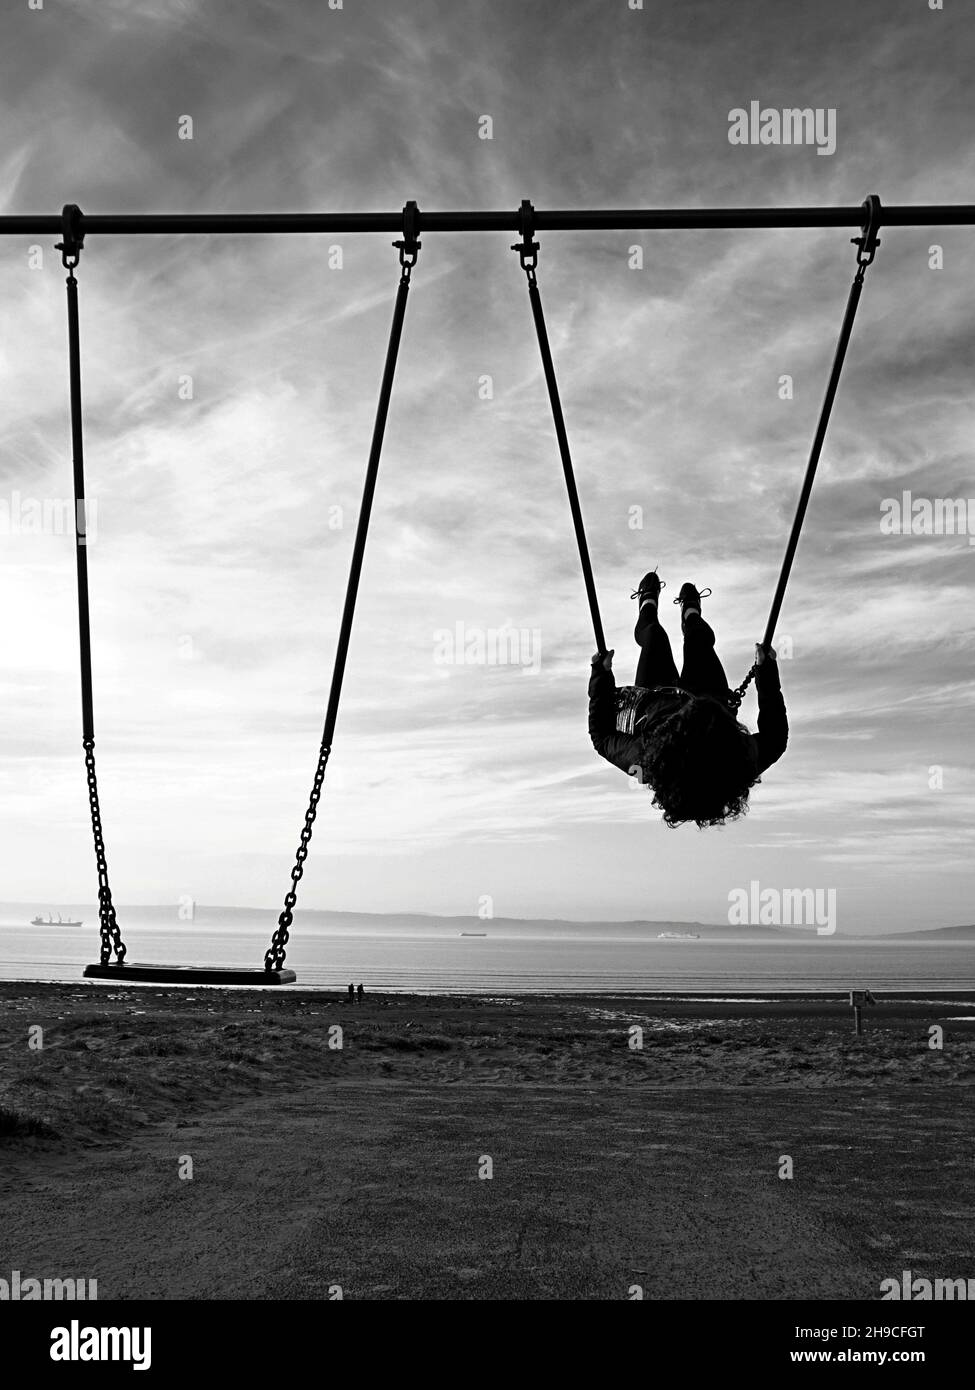 Silhouette of a girl on a swing. High contrast black and white photograph Stock Photo